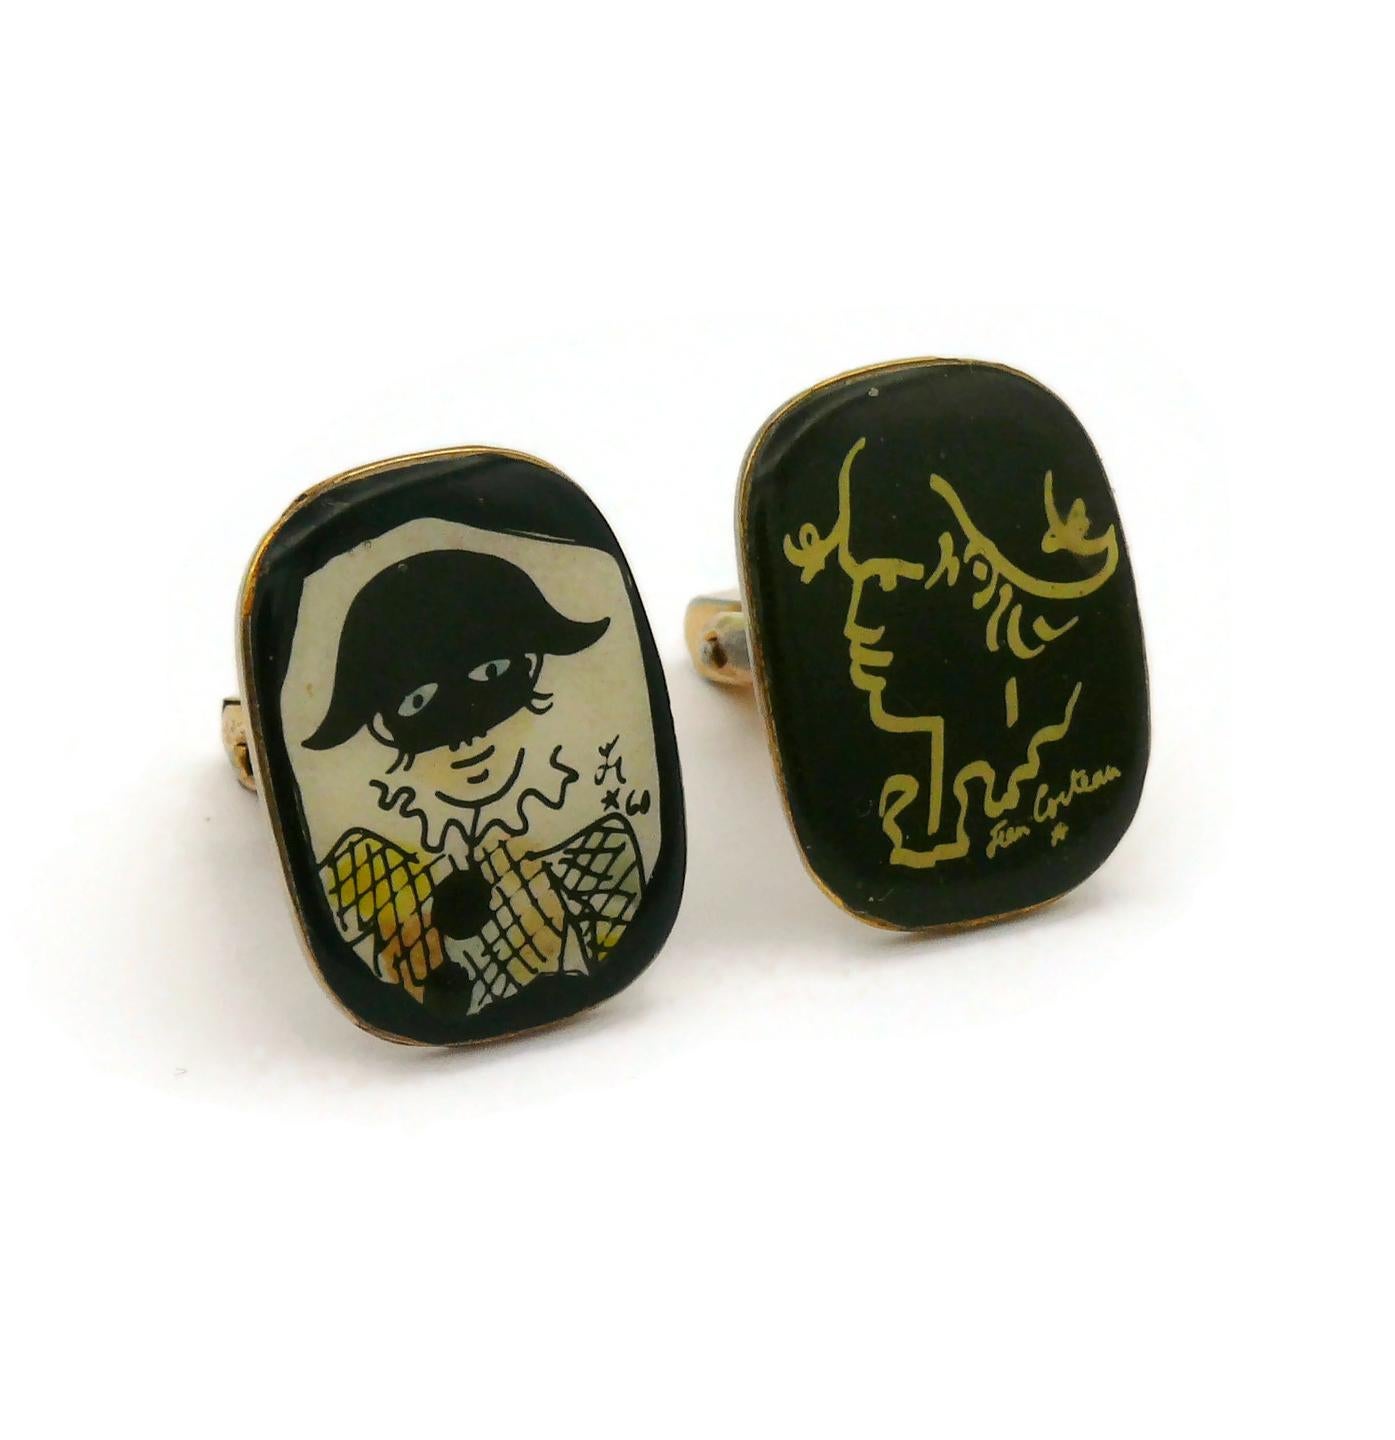 After JEAN COCTEAU vintage gold tone cufflinks featuring printed character inlaid plate.

Printed with the cursive signature JEAN COCTEAU * on a cufflink and monogram JC * on the other one.

Indicative mesaurements : height approx. 2.5 cm (0.98